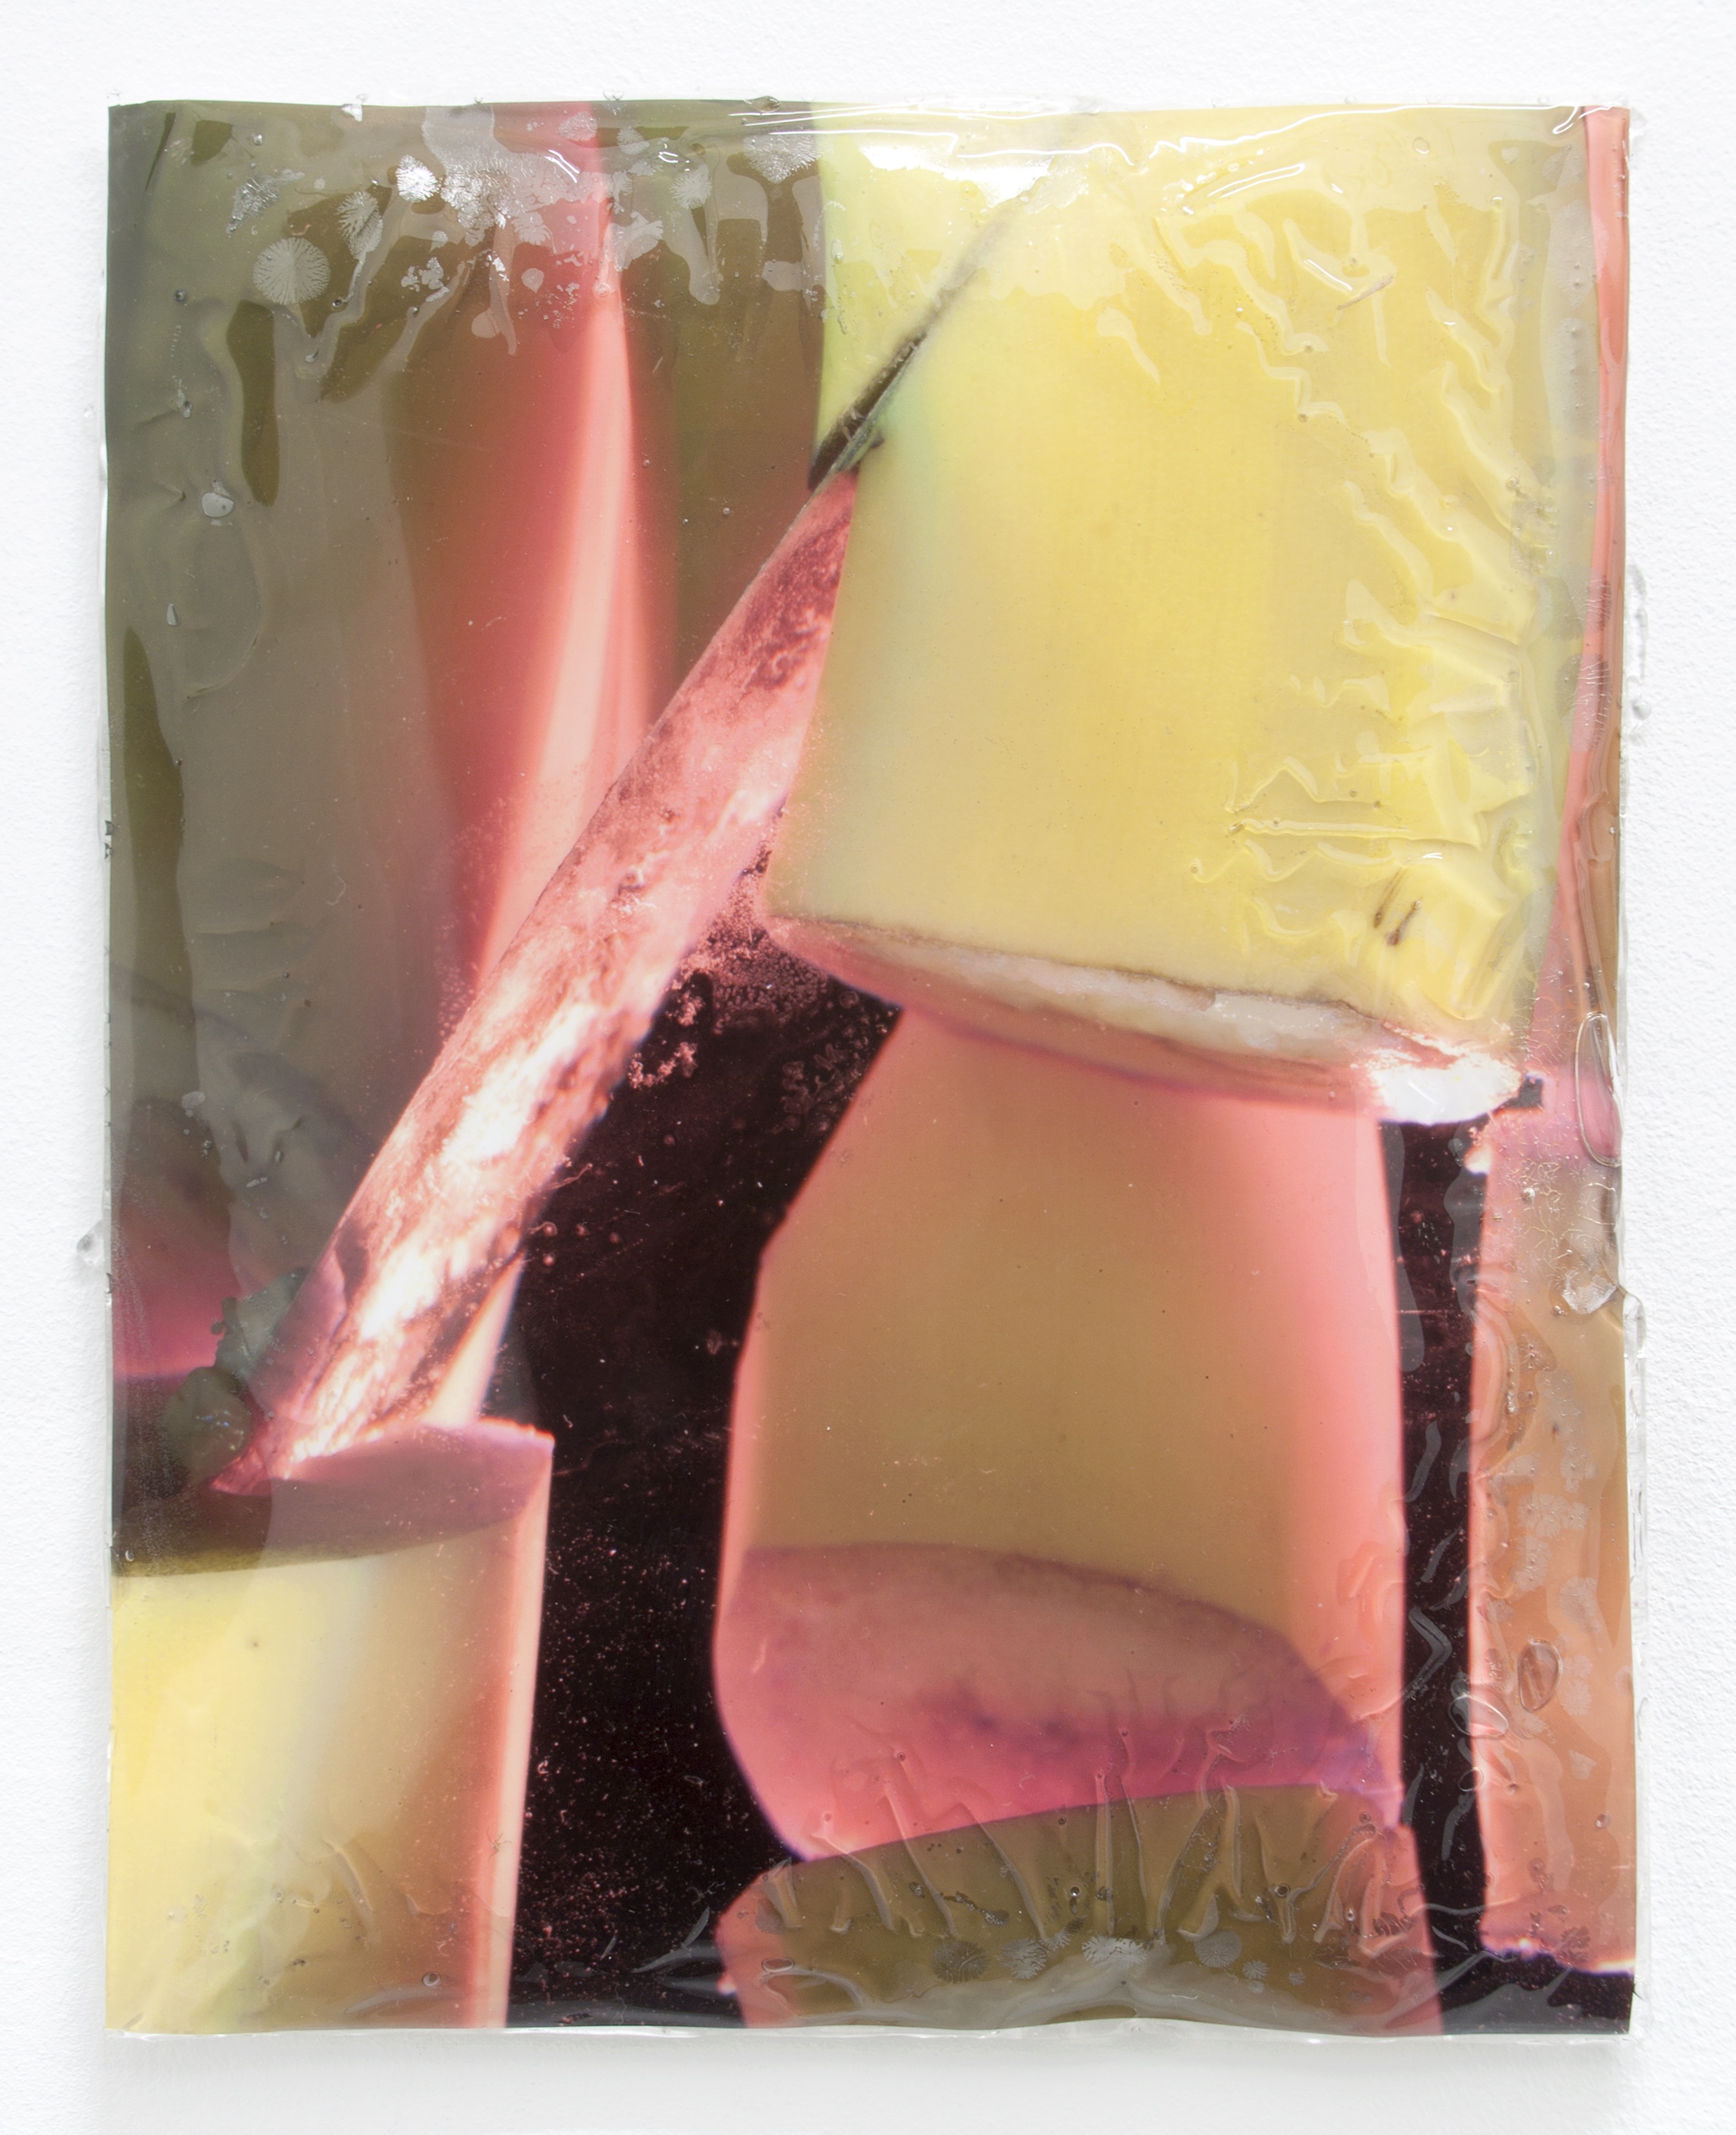 Lucie Stahl, Bananas, 2014 (courtesy of Queer Thoughts, New York)